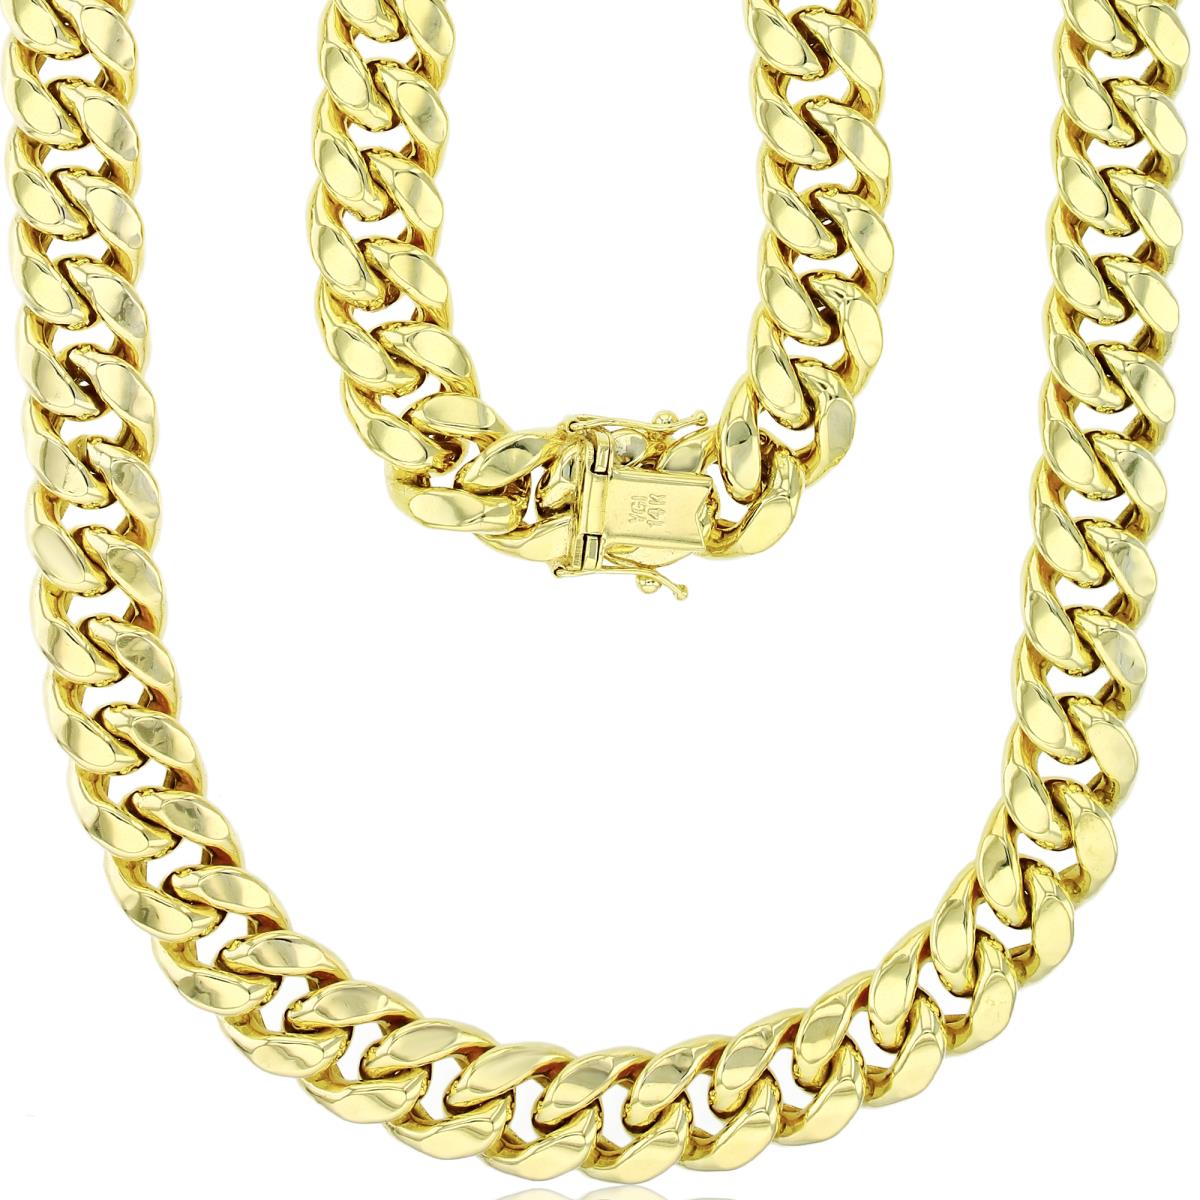 14K Yellow Gold 12mm 28" 300 Hollow Miami Cuban Chain with Box Lock